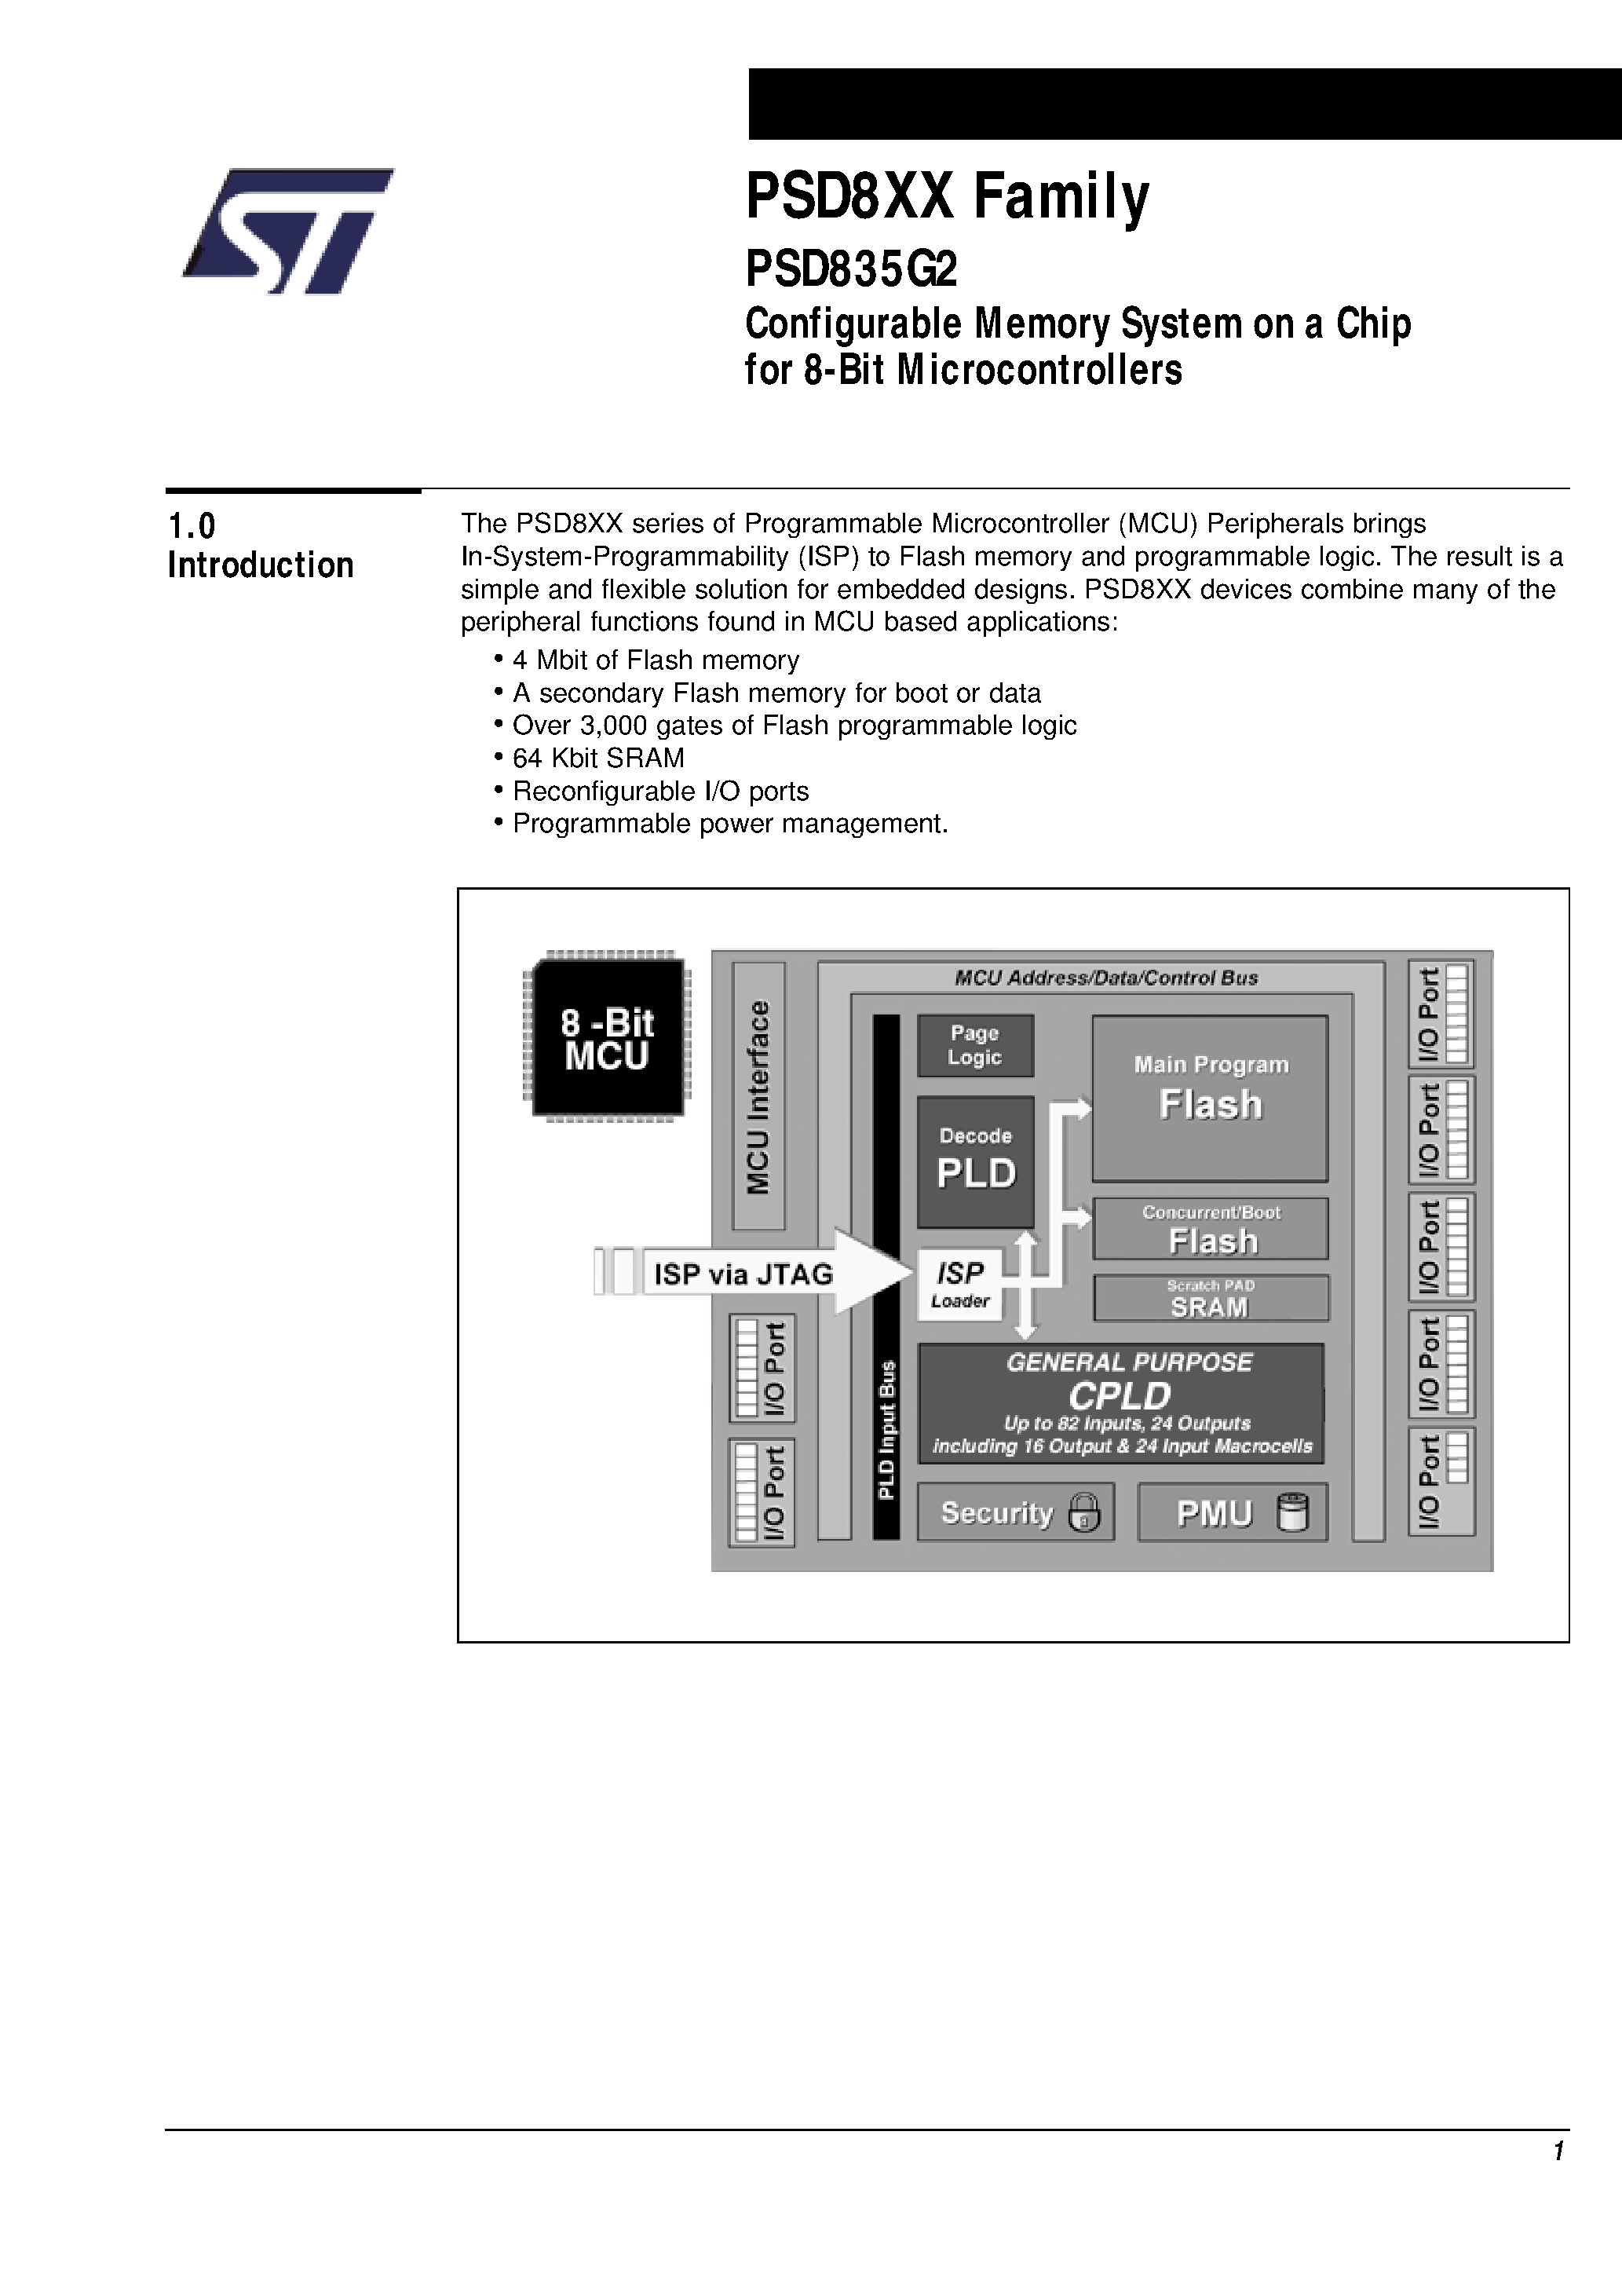 Datasheet PSD835F2-A-20U - Configurable Memory System on a Chip for 8-Bit Microcontrollers page 2